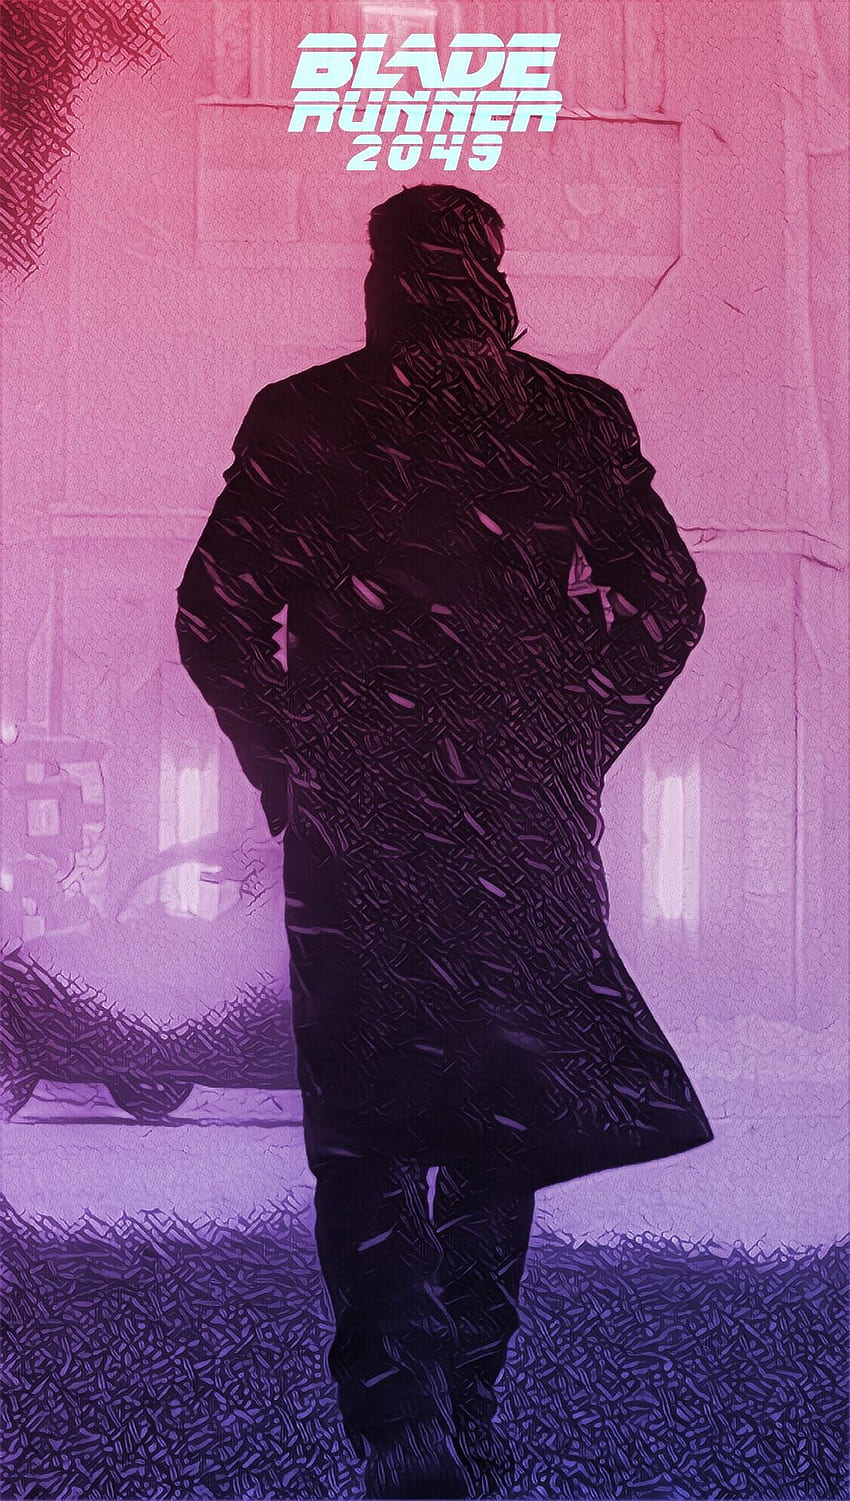 Blade Runner 2049 I made on my phone. Thought you guys might like it.: bladerunner HD phone wallpaper